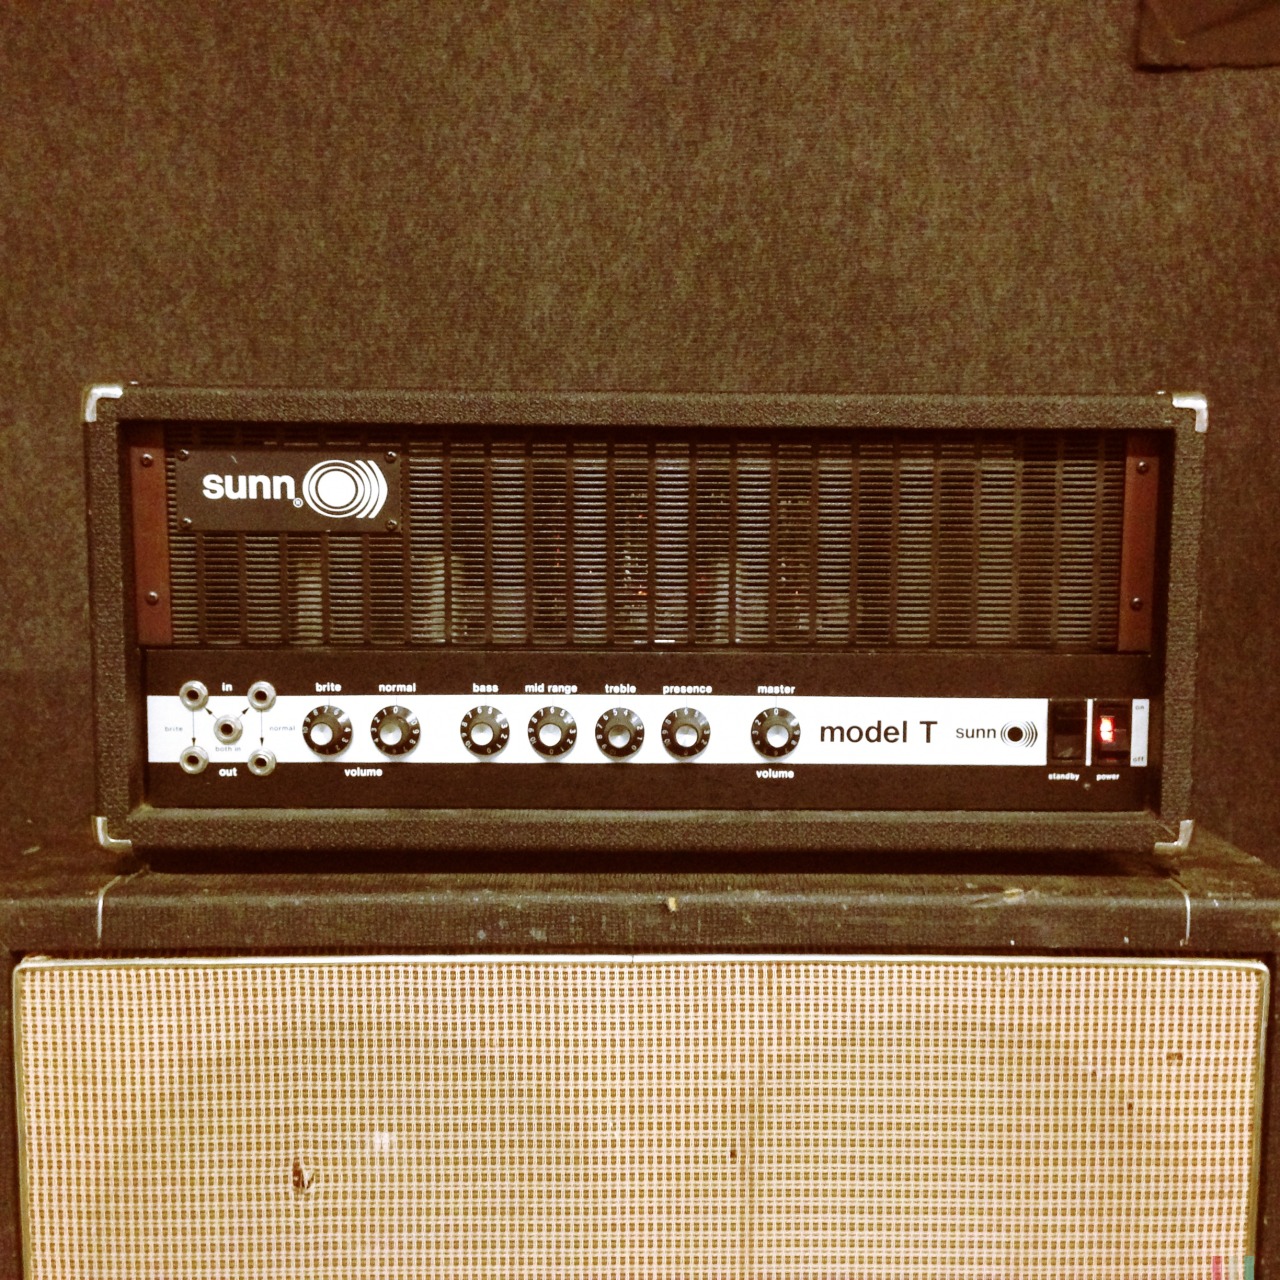 his-beardness:  ‘73 Sunn Model T and ‘74 Sound City L100 cab and their MINE!